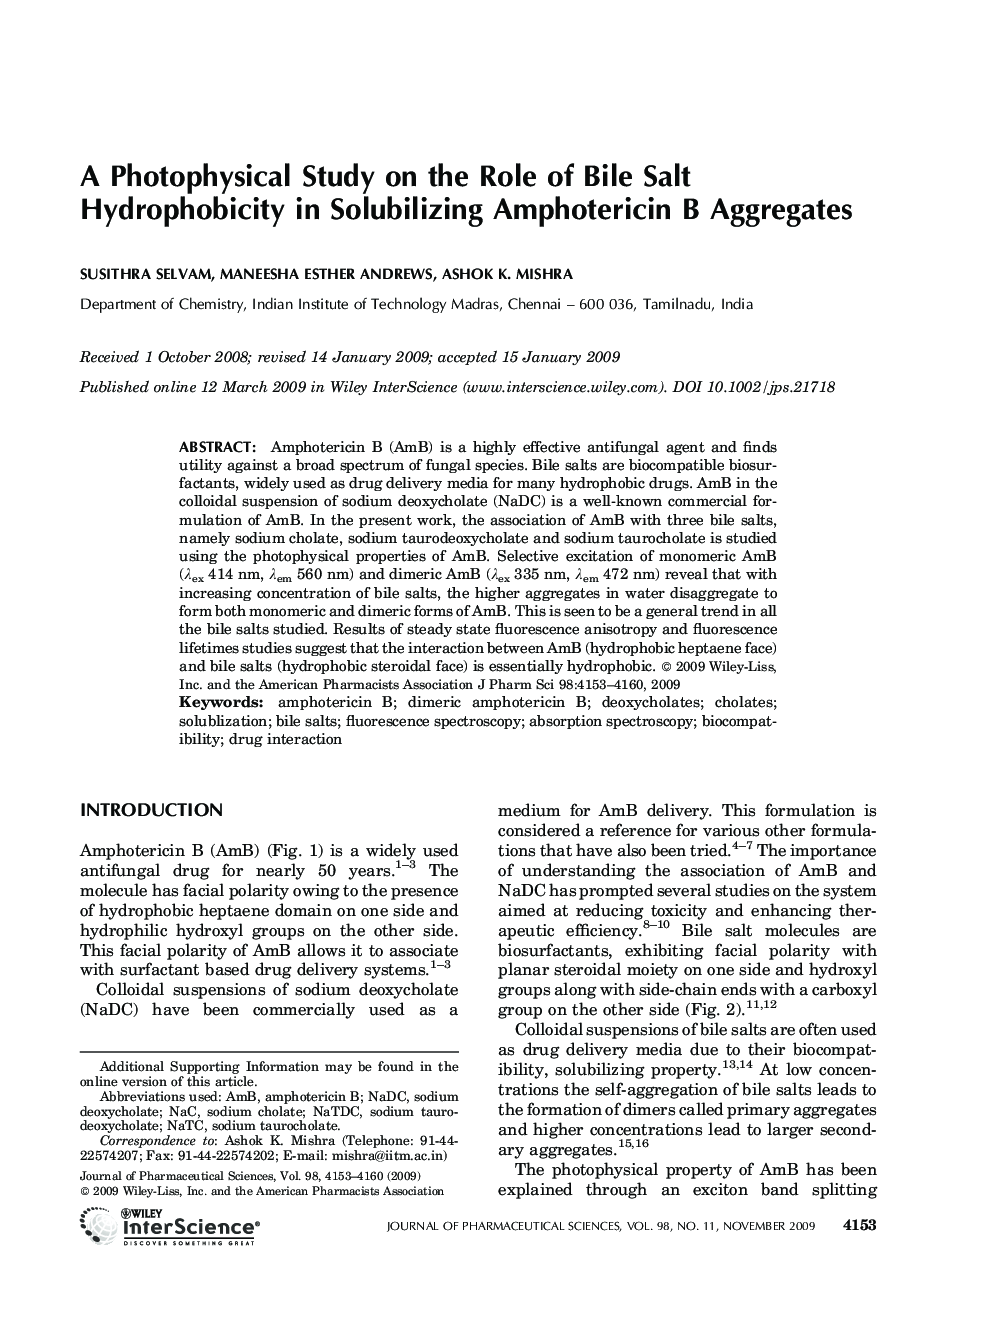 A photophysical study on the role of bile salt hydrophobicity in solubilizing amphotericin B aggregates